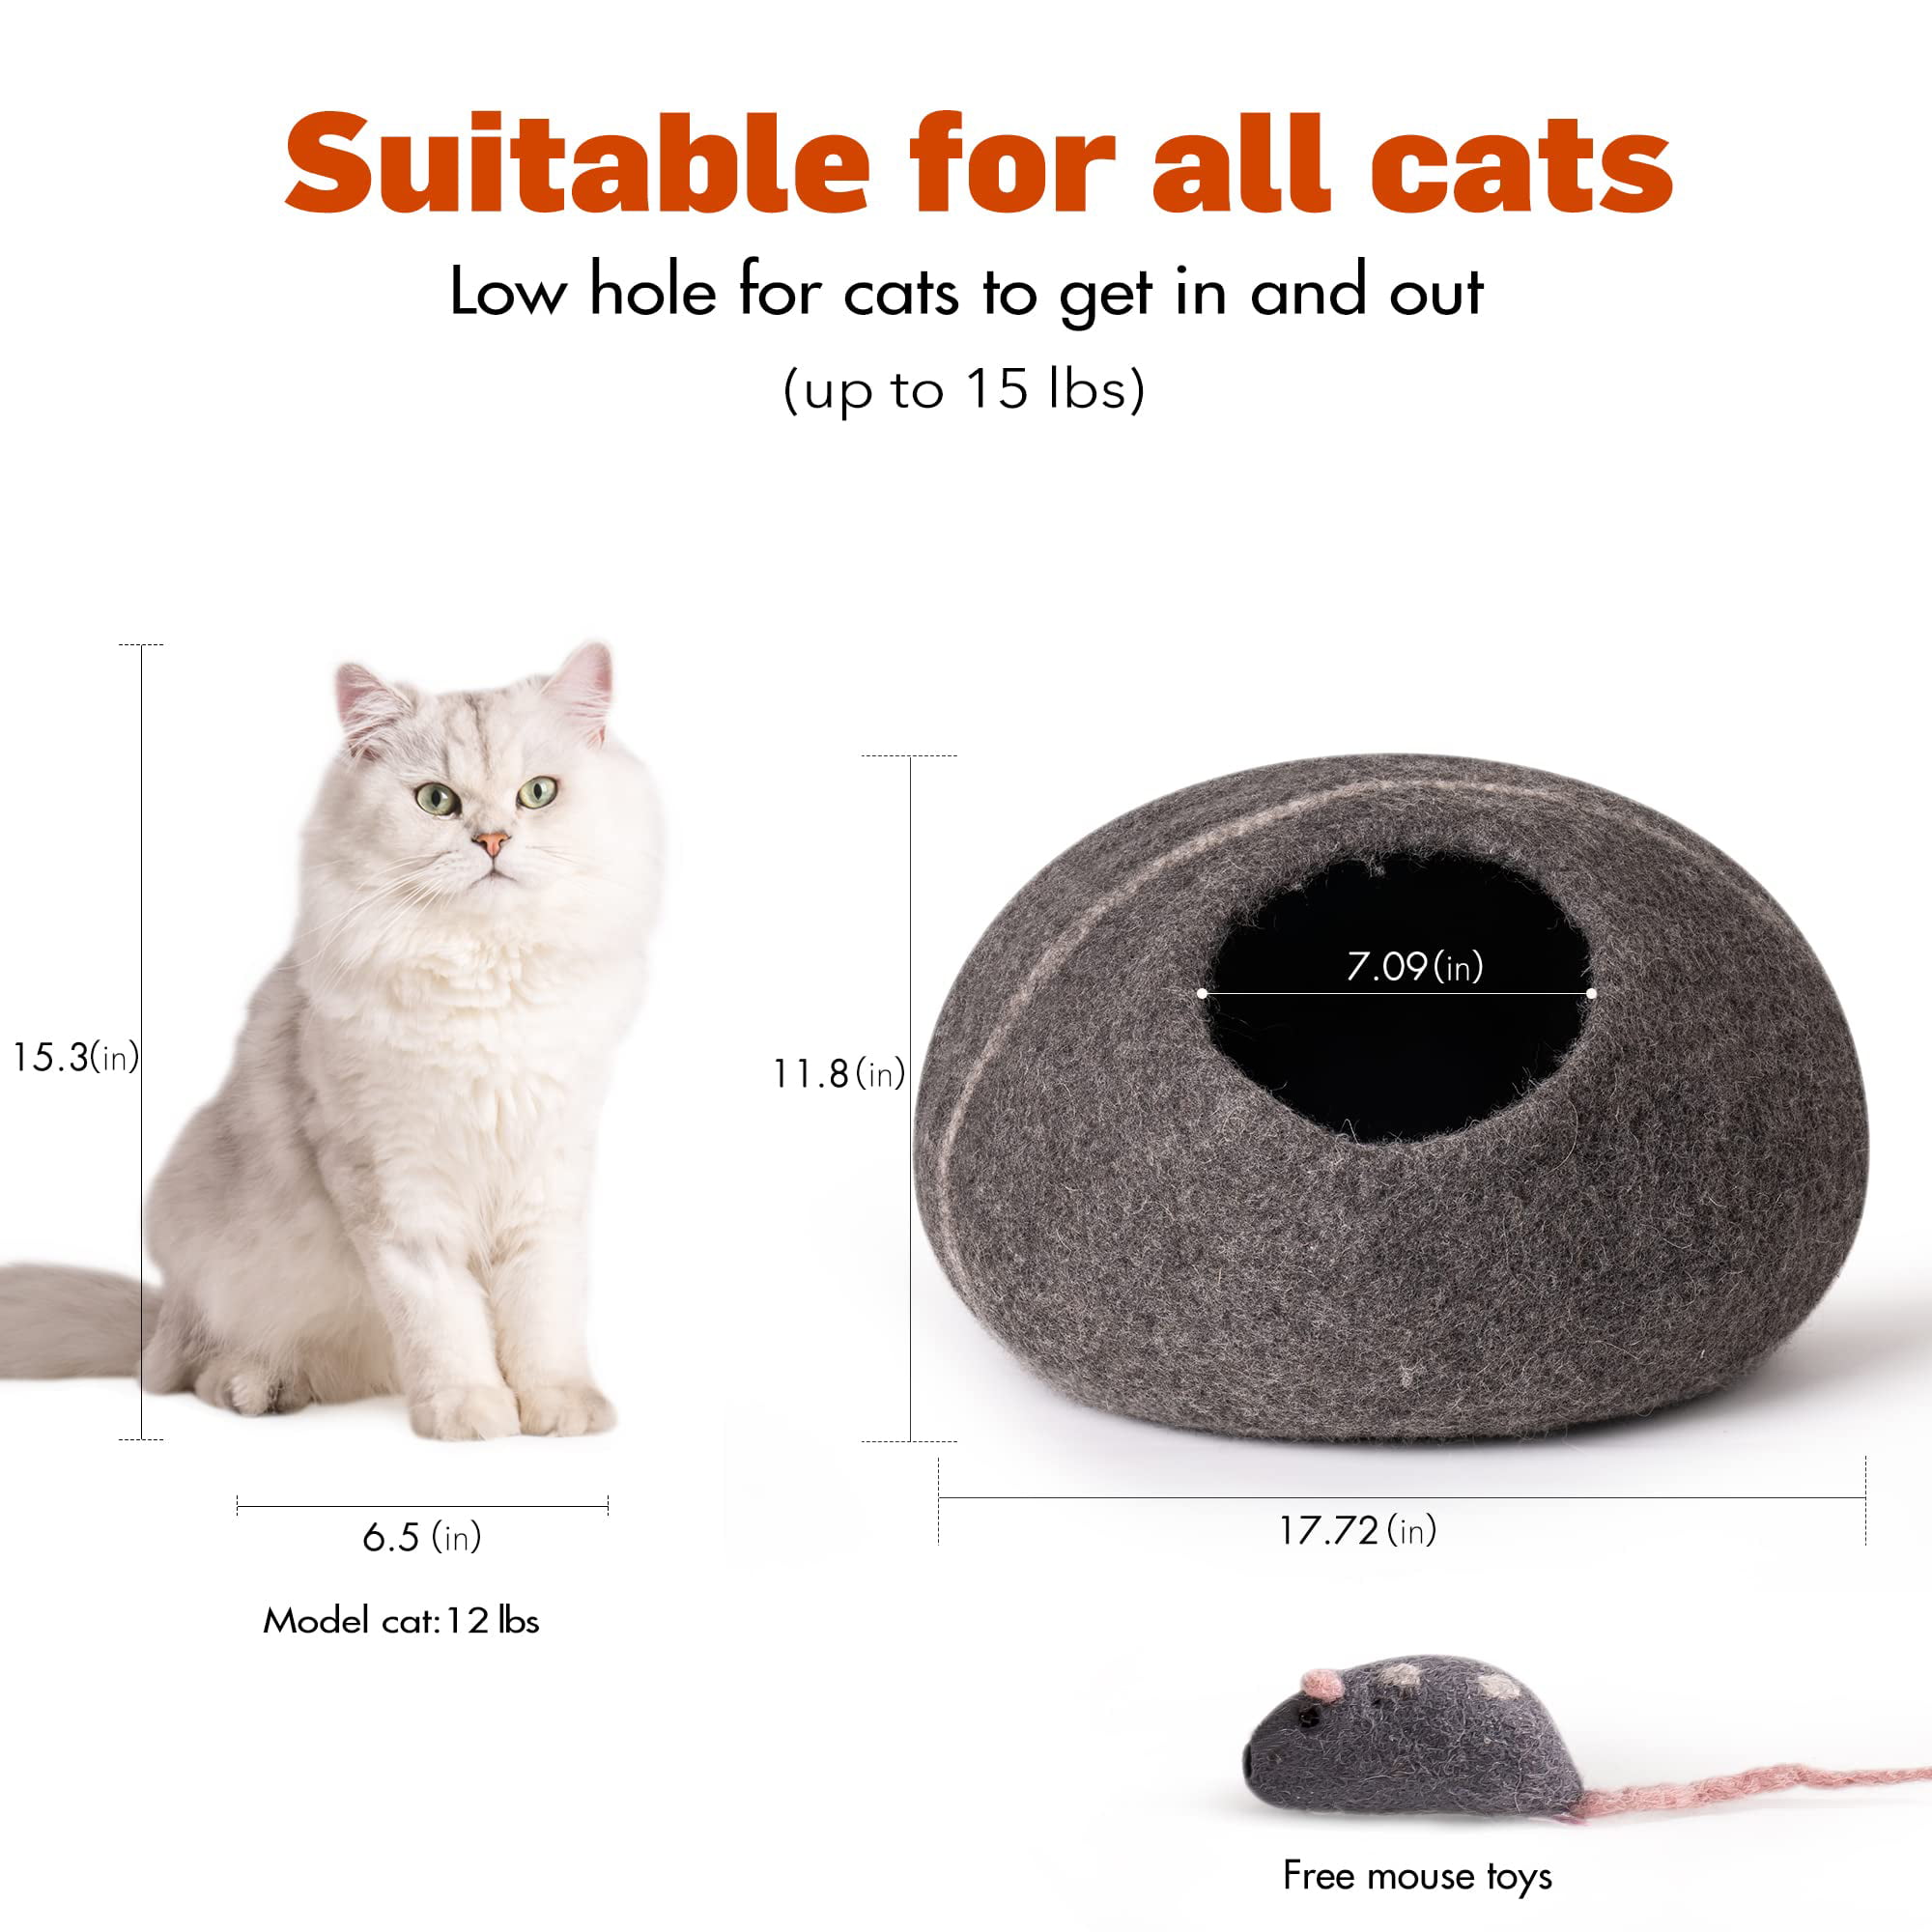 Cats Cat Wool House,Black Kittens,Handmade Medium Indoor Cave and Cat Bed,for Mewoofun